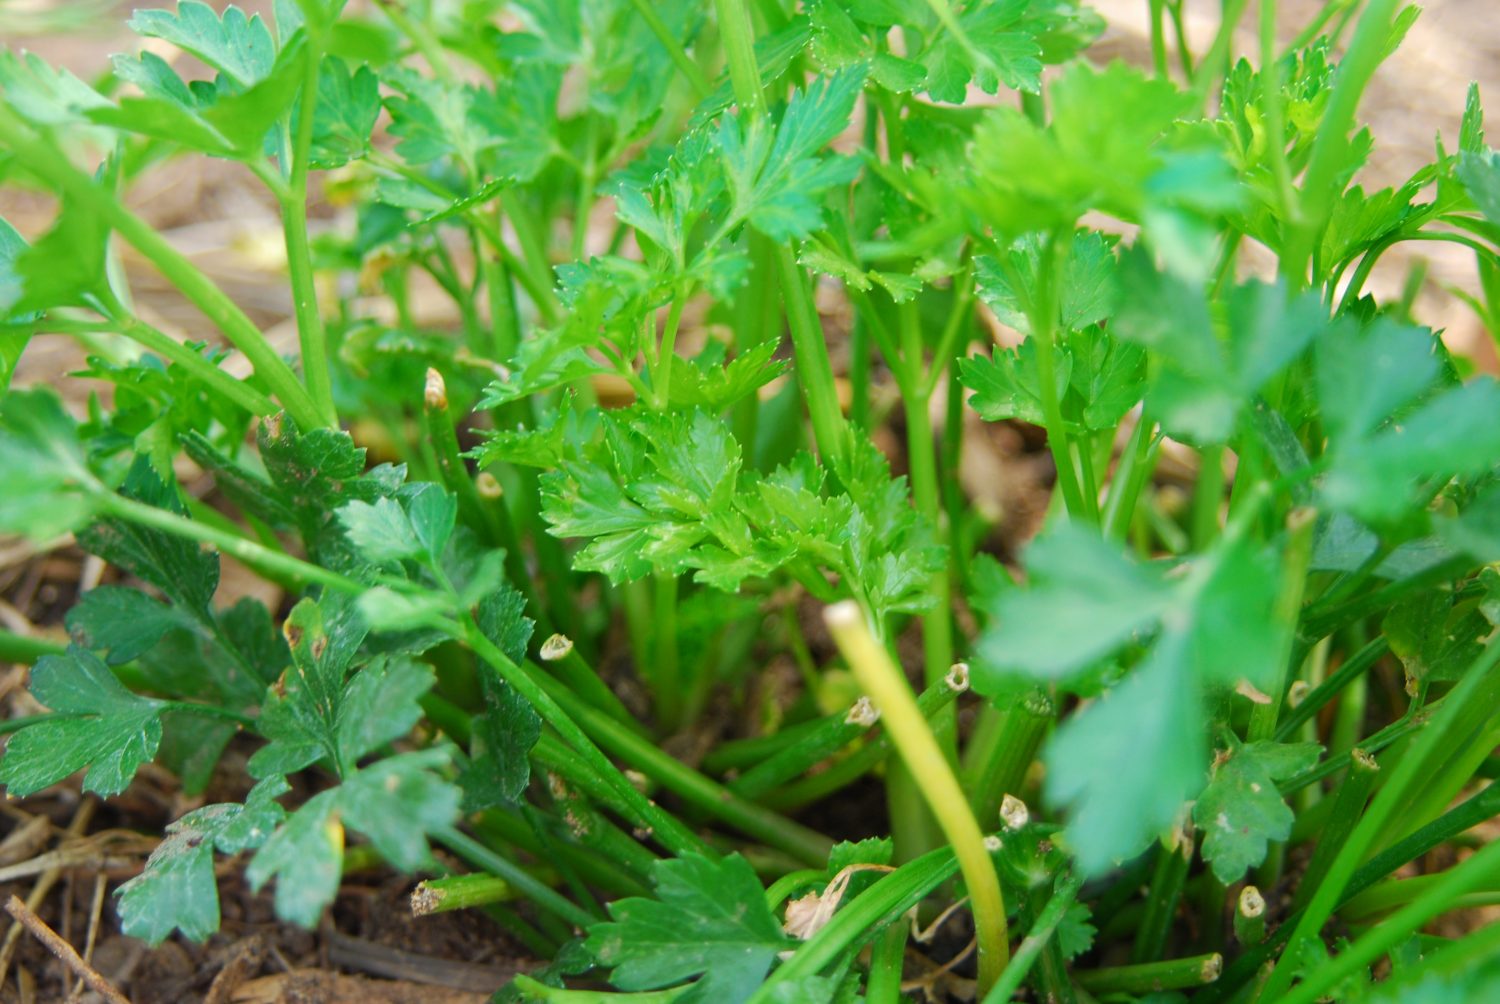 Close-up of cut parsley stems.